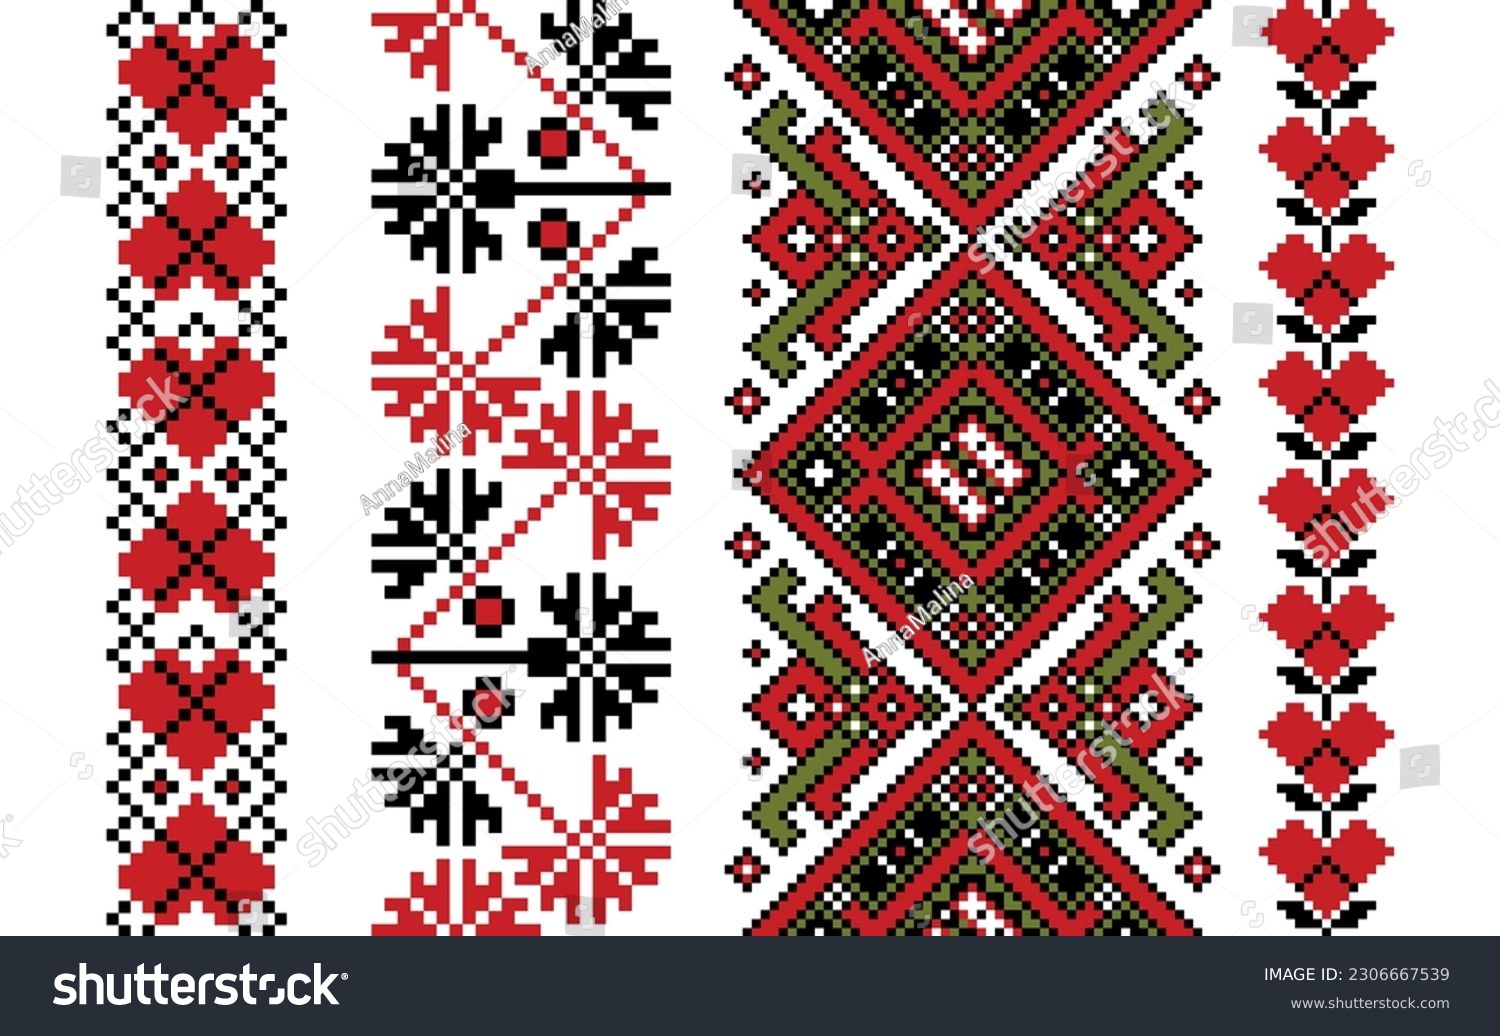 SVG of Scheme of Ukrainian embroidery in 8-bit vector style. Ethnic ornament for cross stitching.  Pixel factory boho pattern for decorating clothes, bags, accessories. Traditional seamless geometric pattern svg